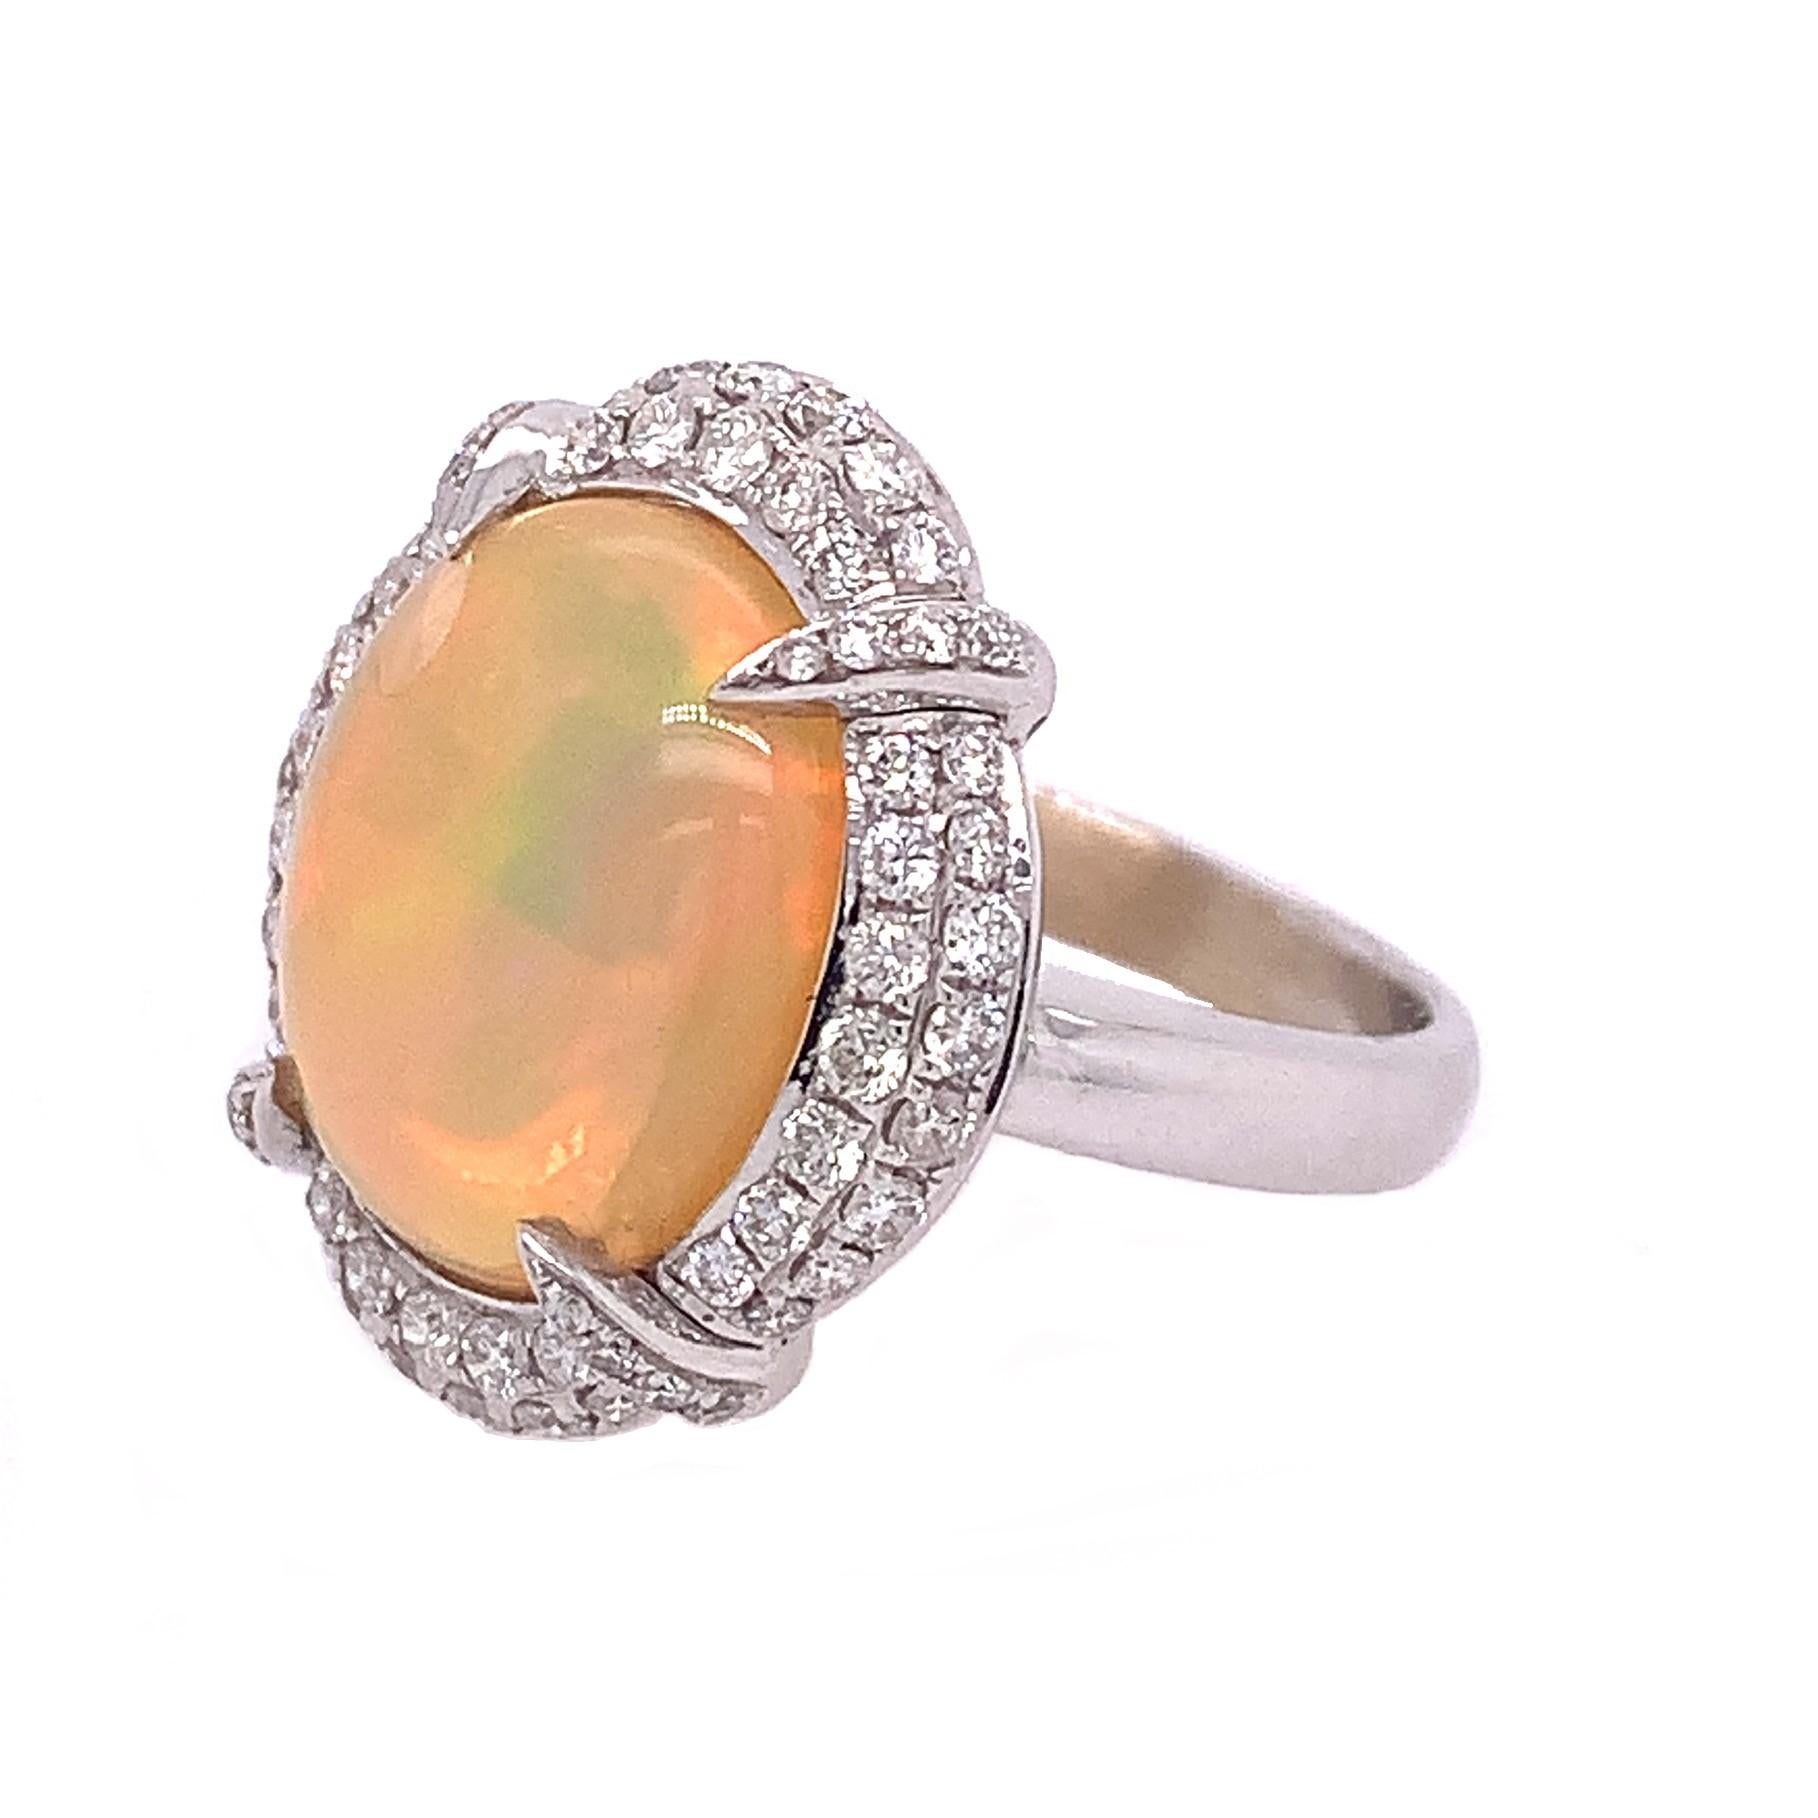 18K White Gold
Opal: 5.21ct total weight.
Diamond: 0.85ct total weight.
All diamonds are G-H/SI stones.